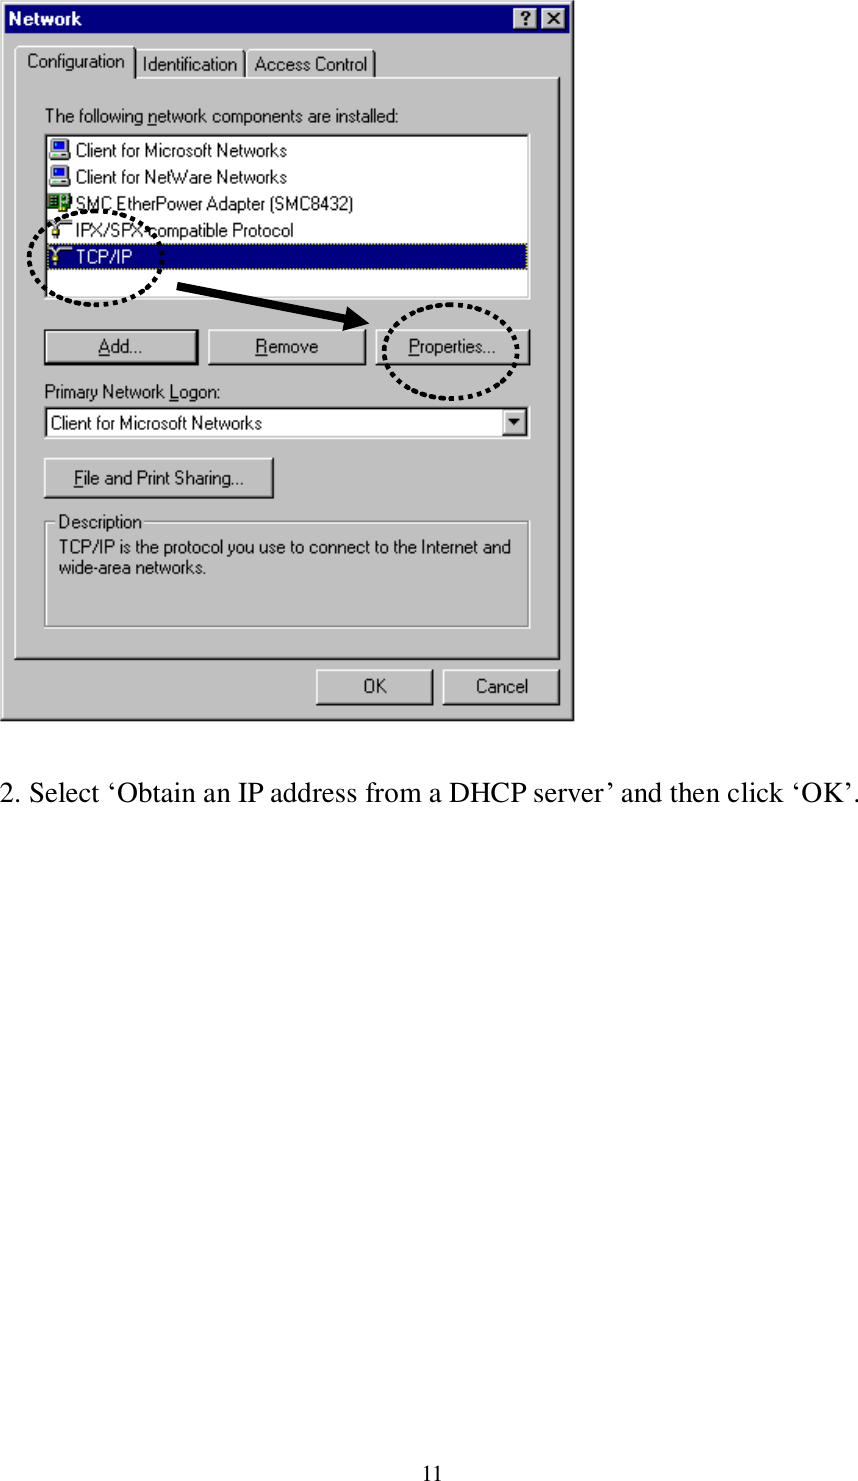 11   2. Select „Obtain an IP address from a DHCP server‟ and then click „OK‟.    